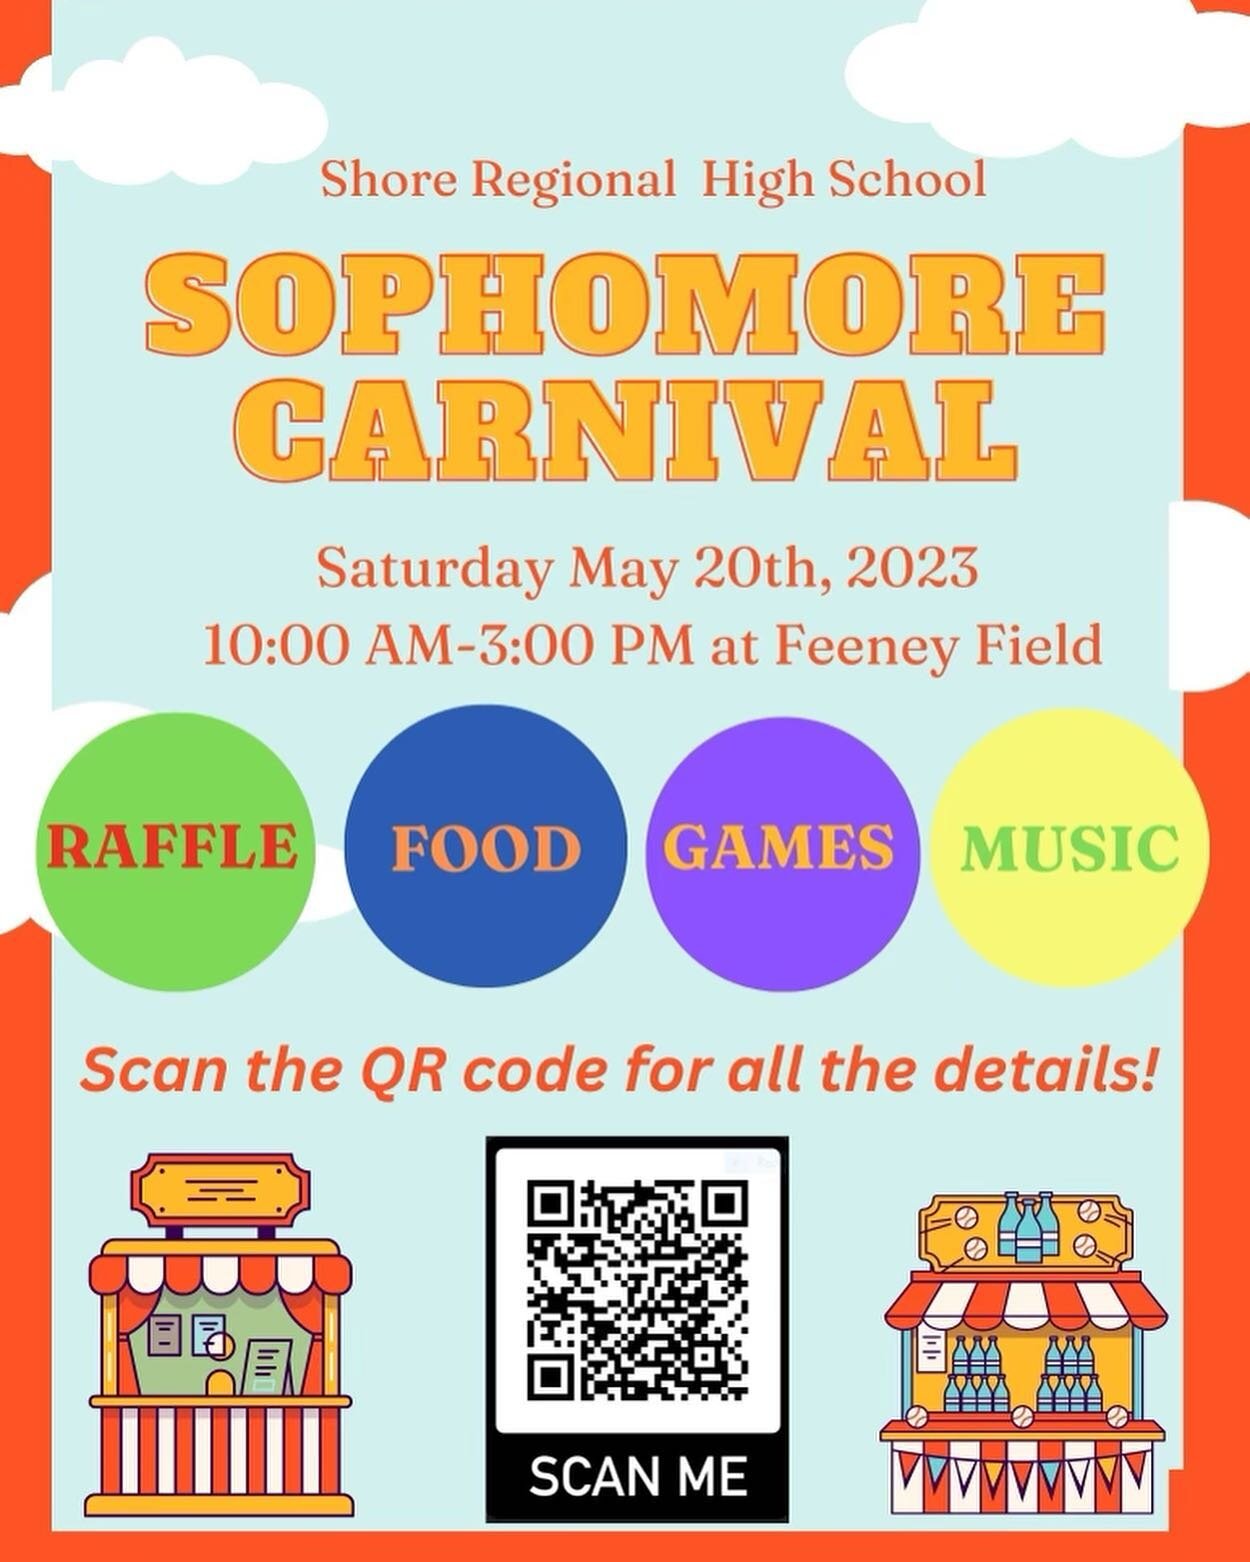 We are so excited to be invited to the Shore Regional Sophomore Carnival this weekend!  Come see us!